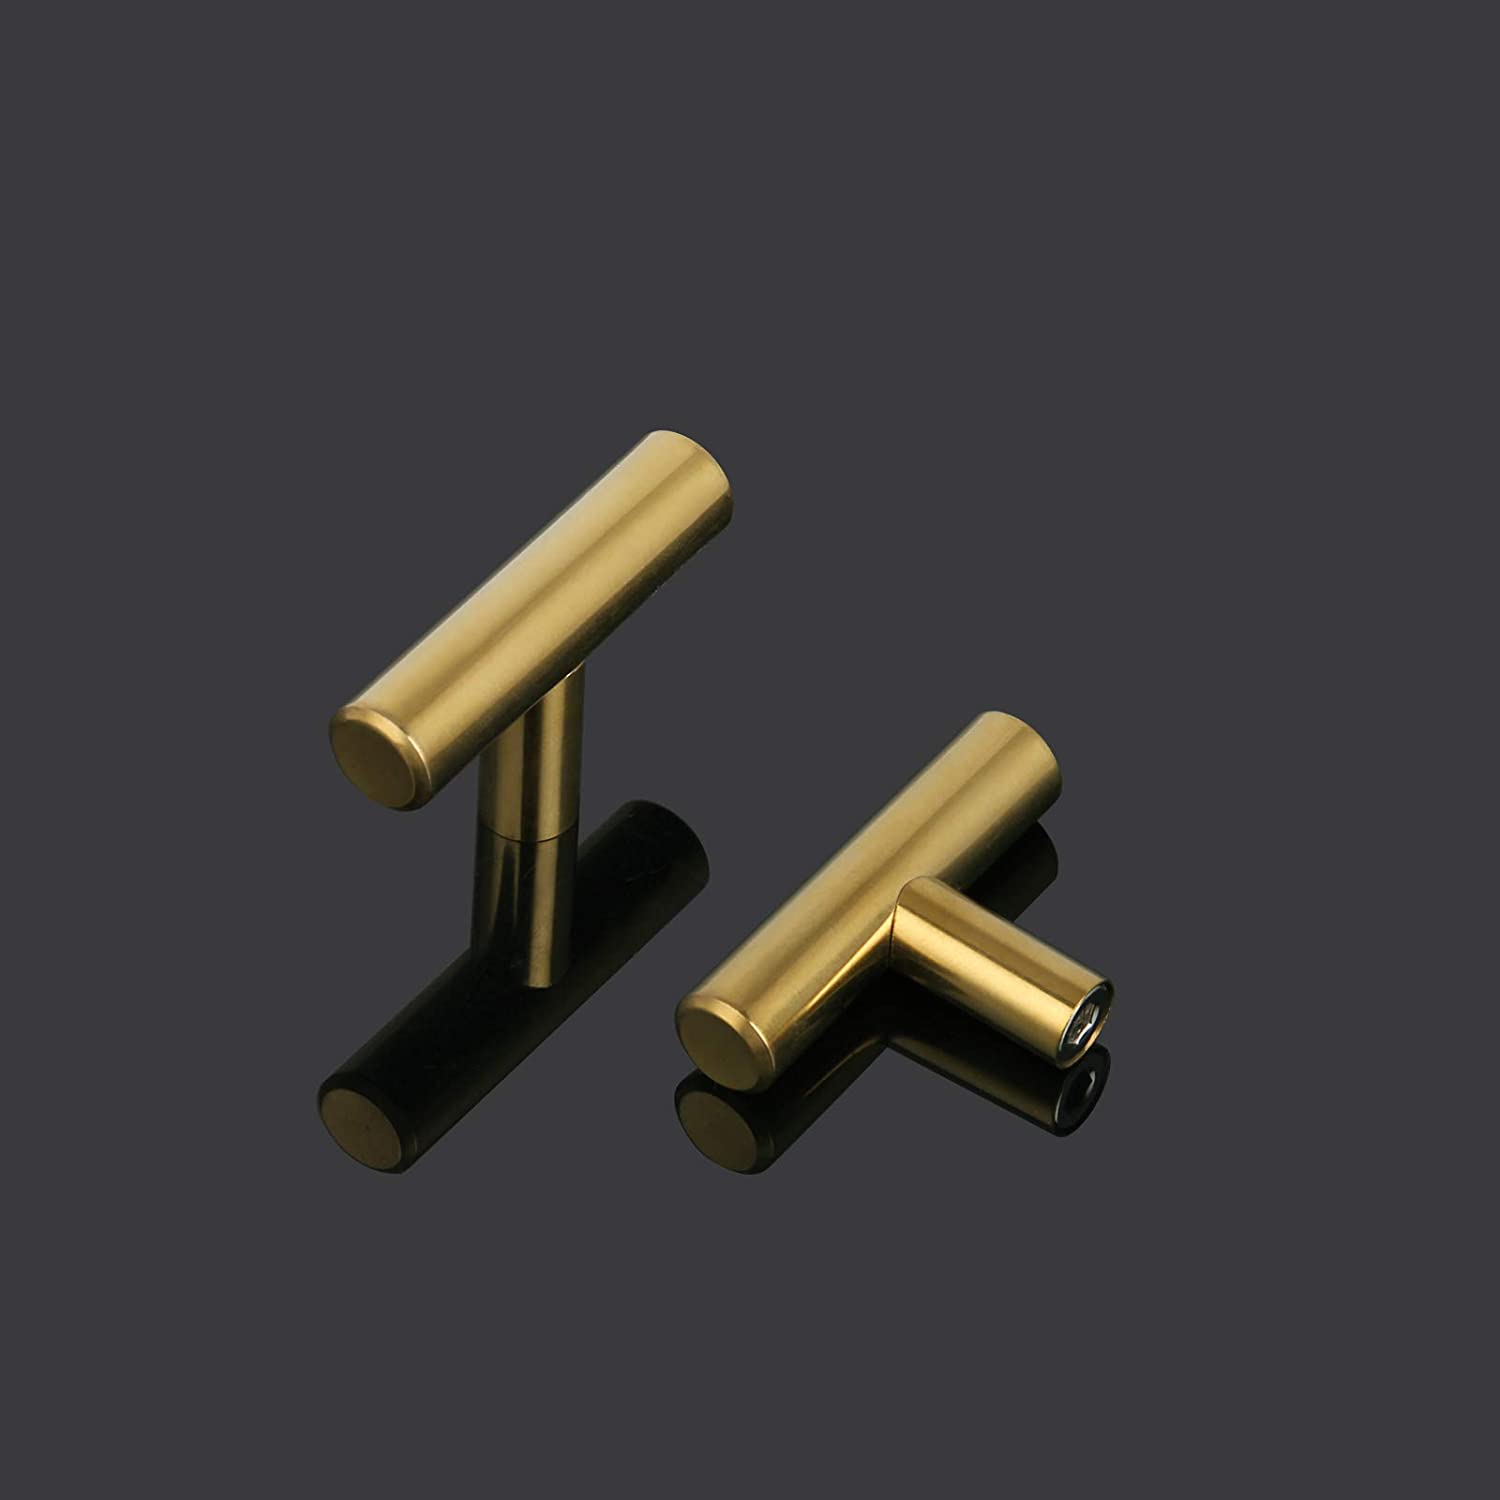 Single Hole T Bar Cabinet Knobs 5 Pack Gold Kitchen Handles Brushed Brass Cupboard Drawer Pulls 50mm/2" Overall Length. - e4cents